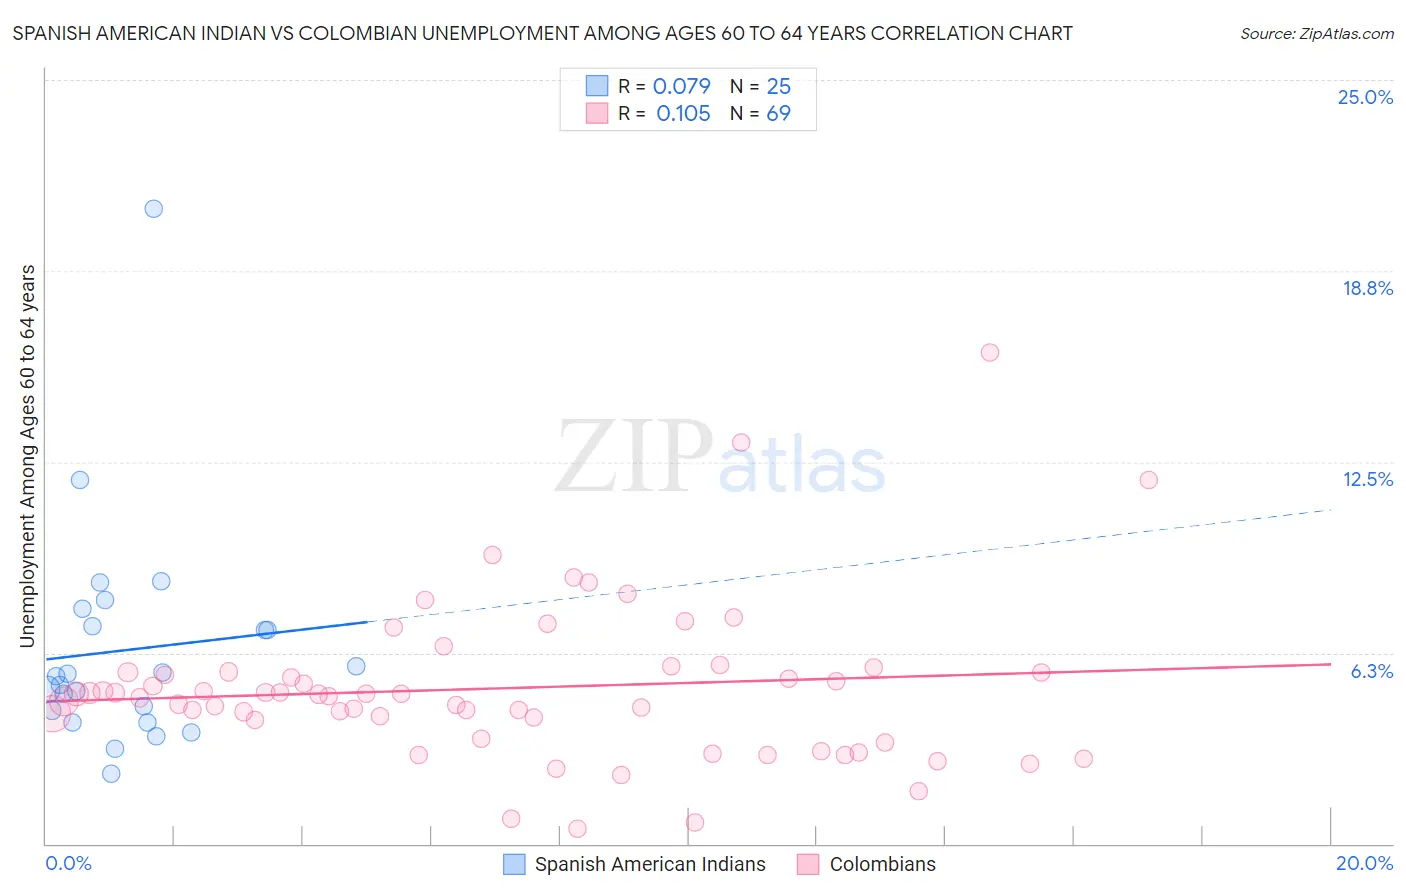 Spanish American Indian vs Colombian Unemployment Among Ages 60 to 64 years